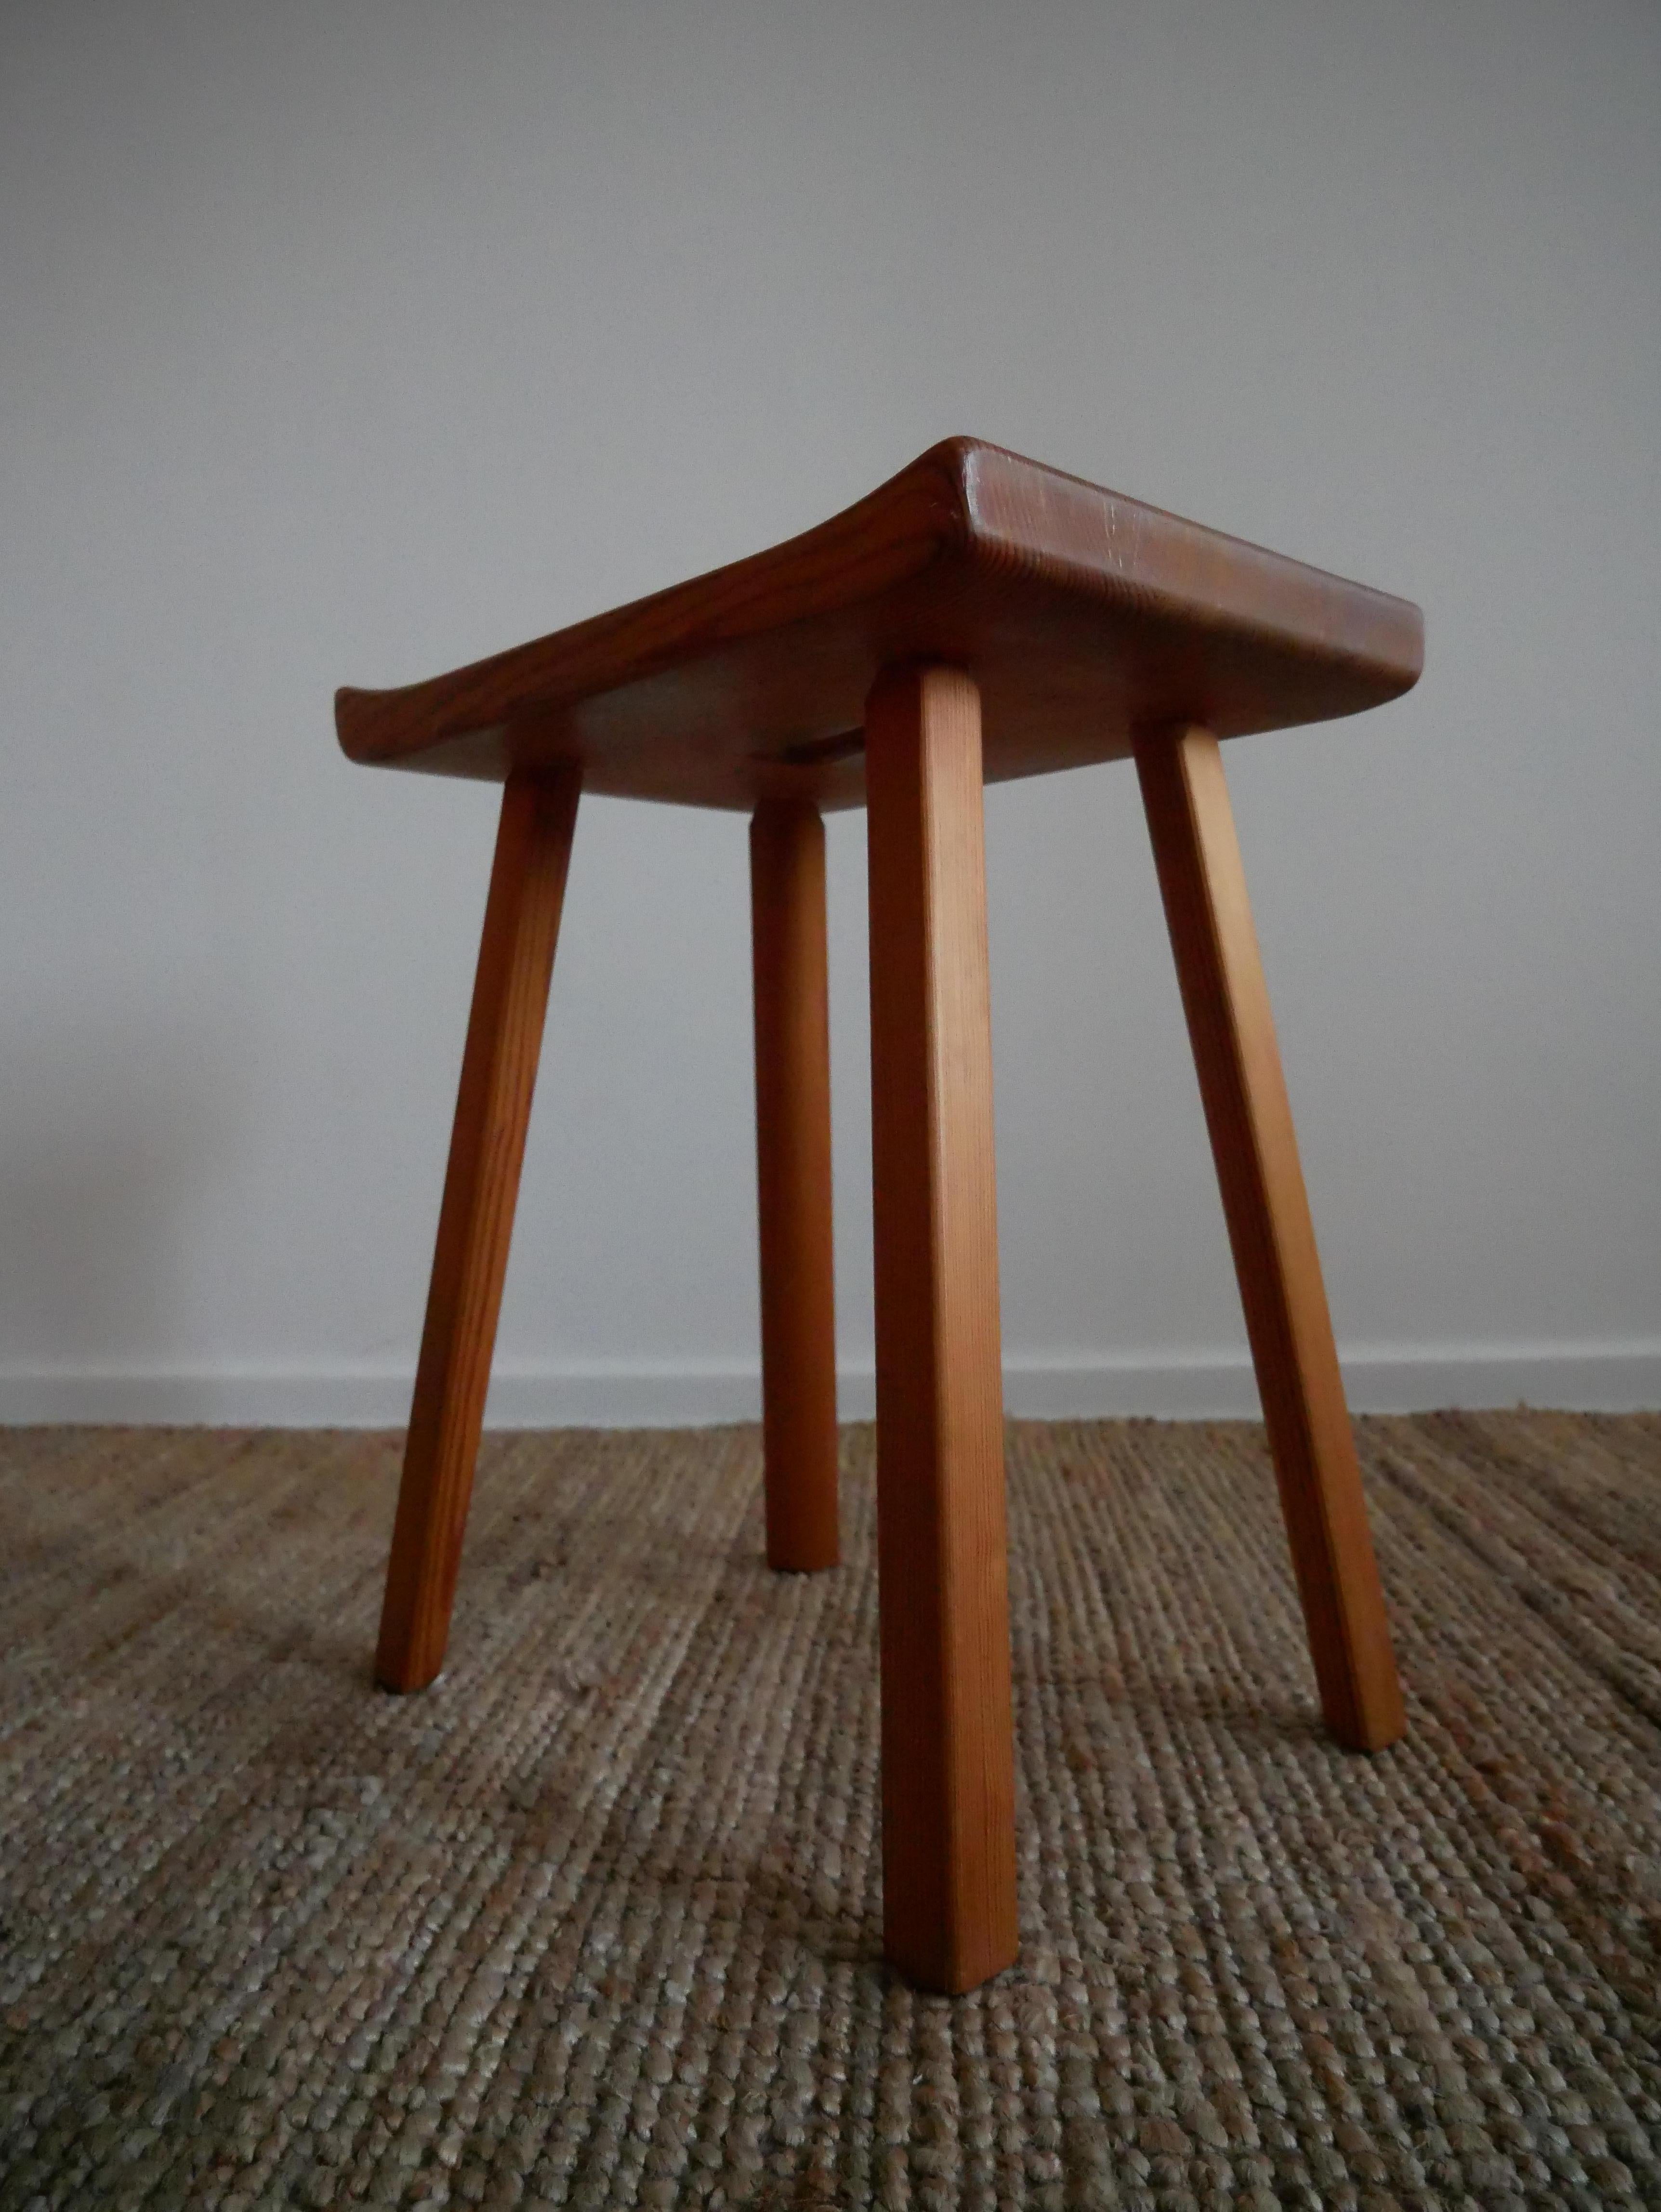 Design by Carl Malmsten, made out of solid pine in circa 1950s.
Visingsö stool.